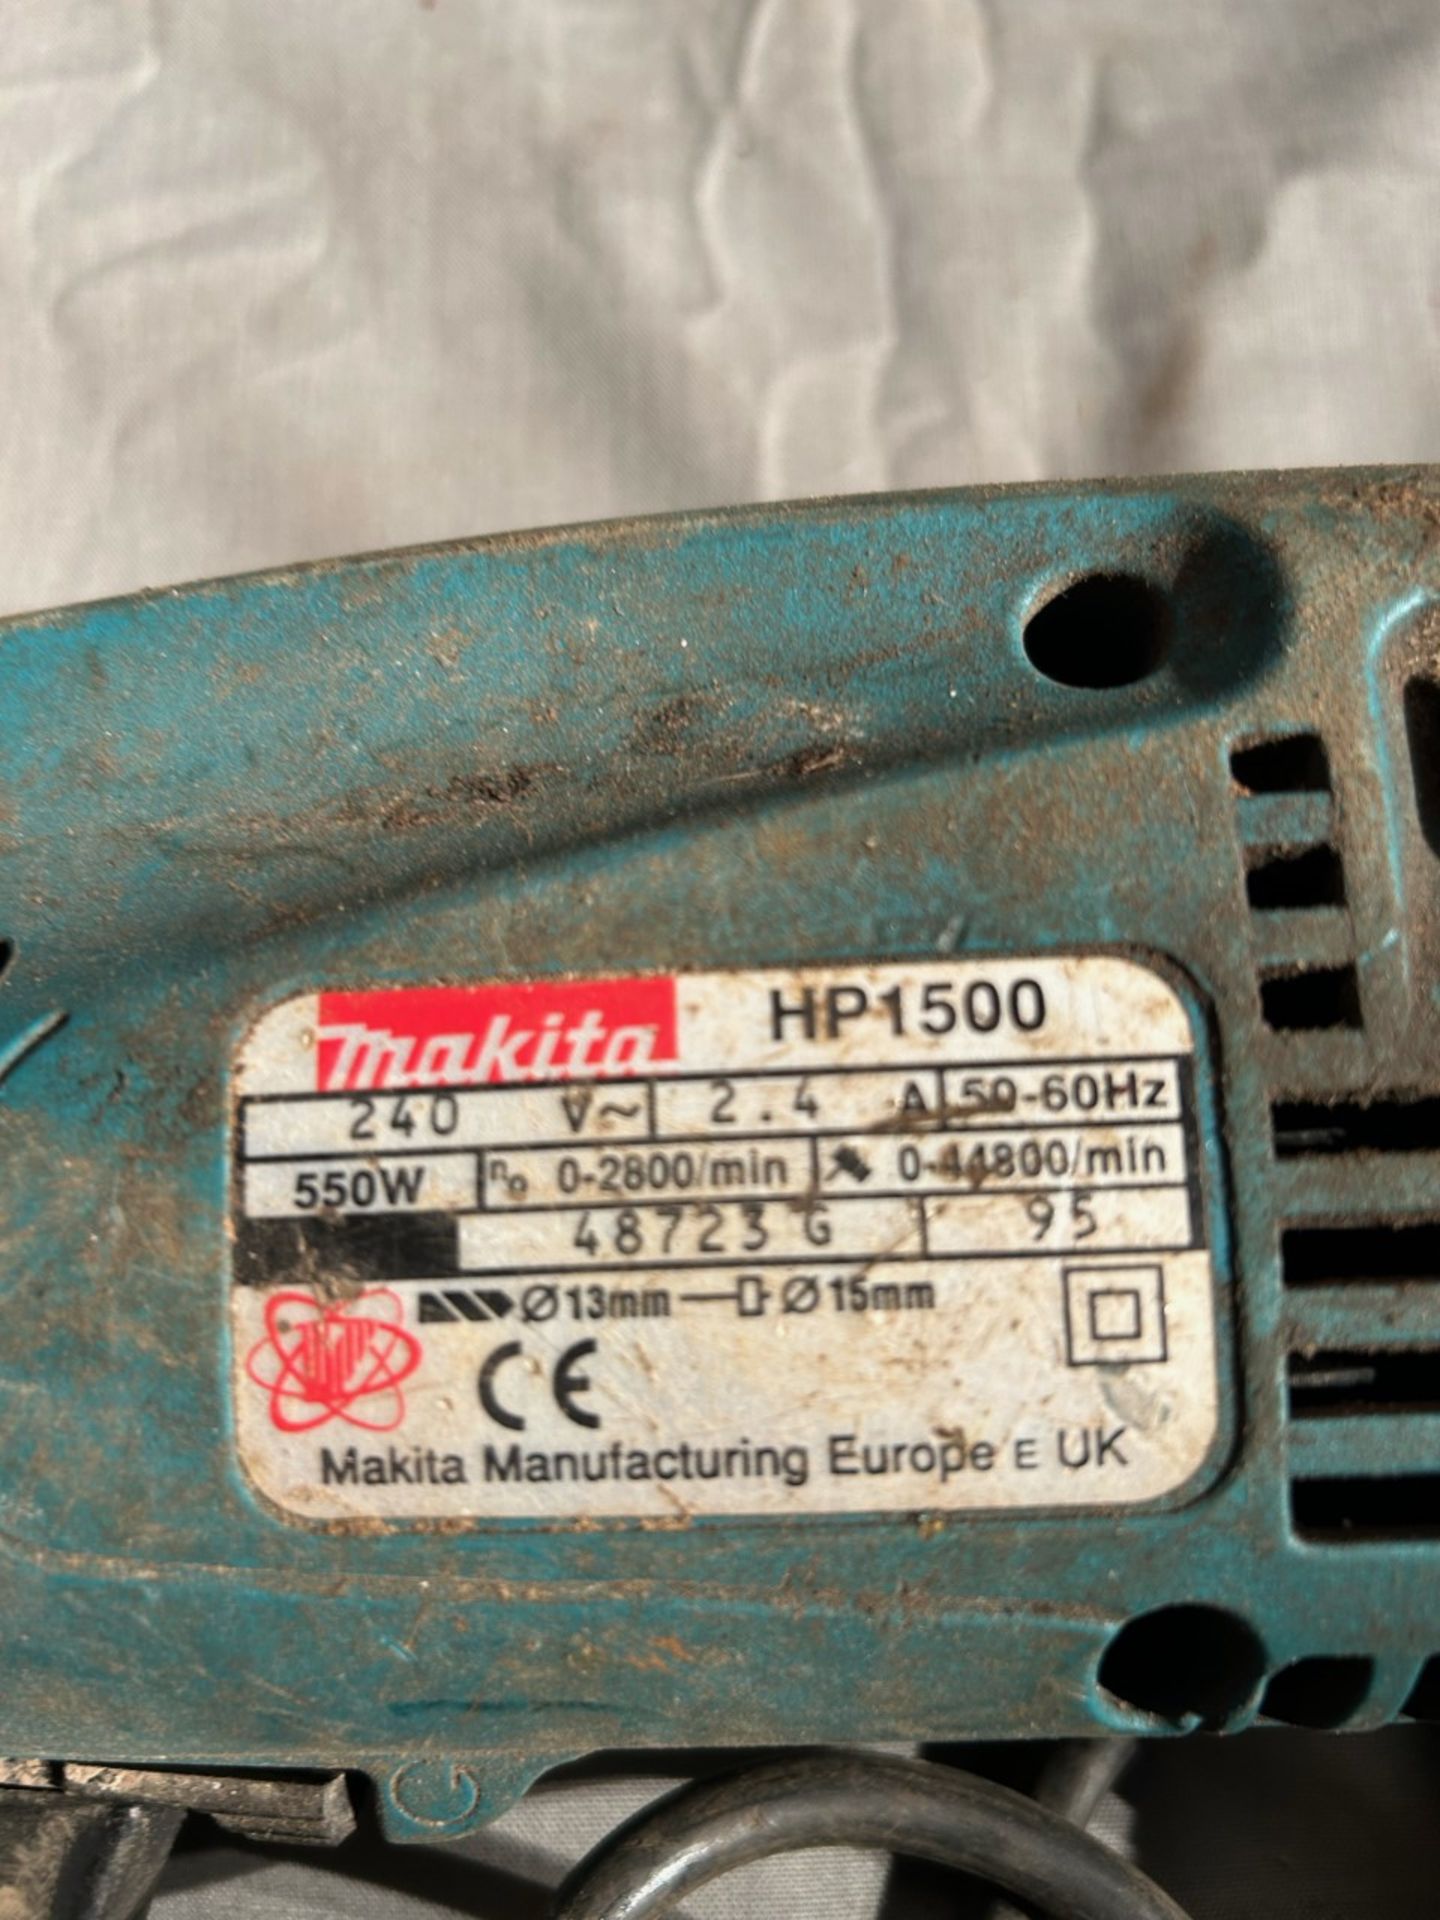 Makita HP1500 240v drill. Working order as seen in video - Image 2 of 2